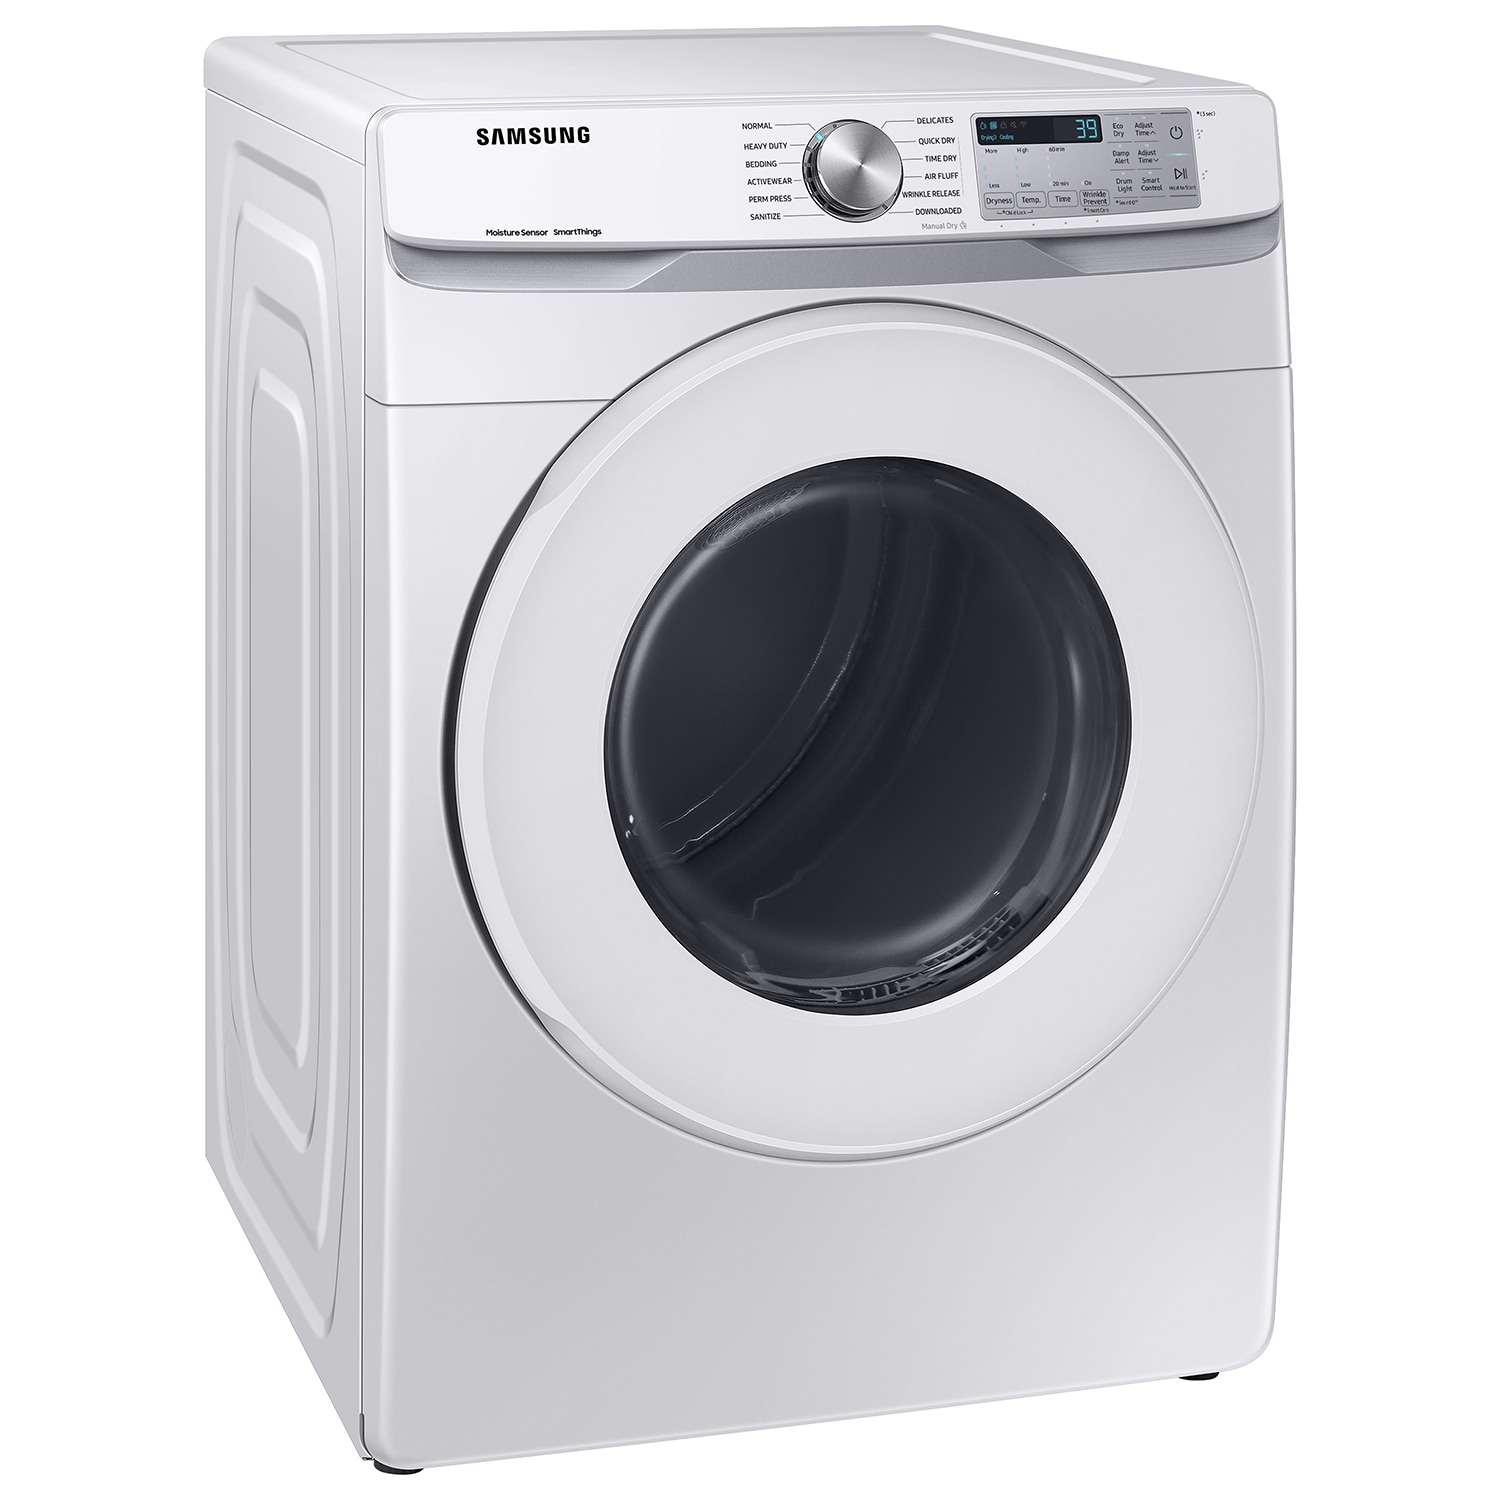 Samsung WE402NW/A3 Laundry Pedestal - White for sale online